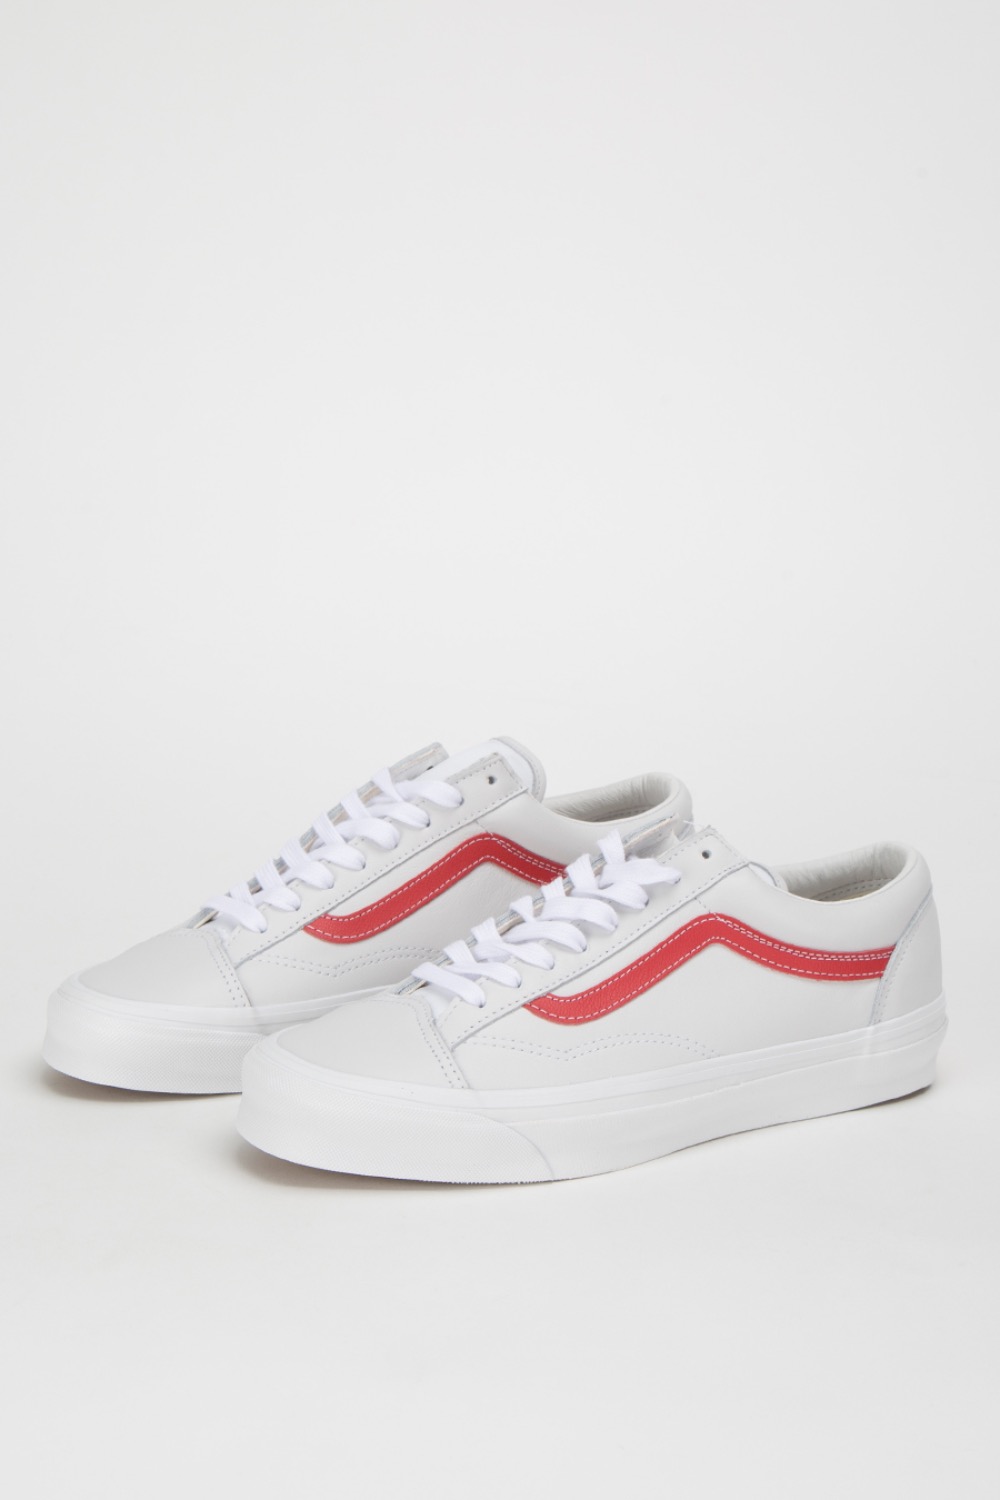 OG STYLE 36 LX (LEATHER) RED/TRUE WHITE